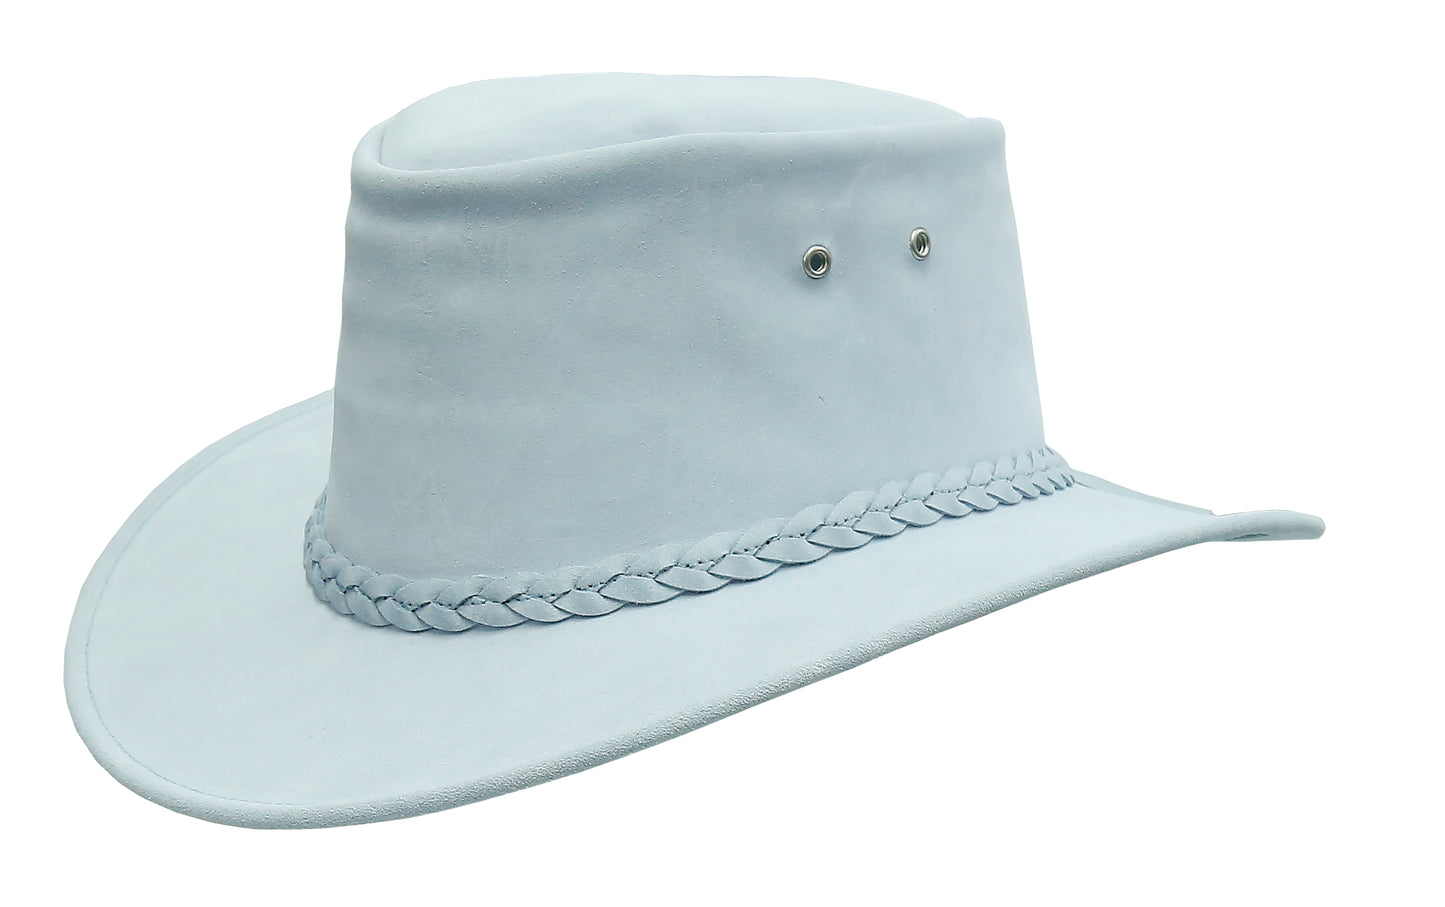 Cowboy hat leather hat for women and gentlemen made of soft suede in light blue